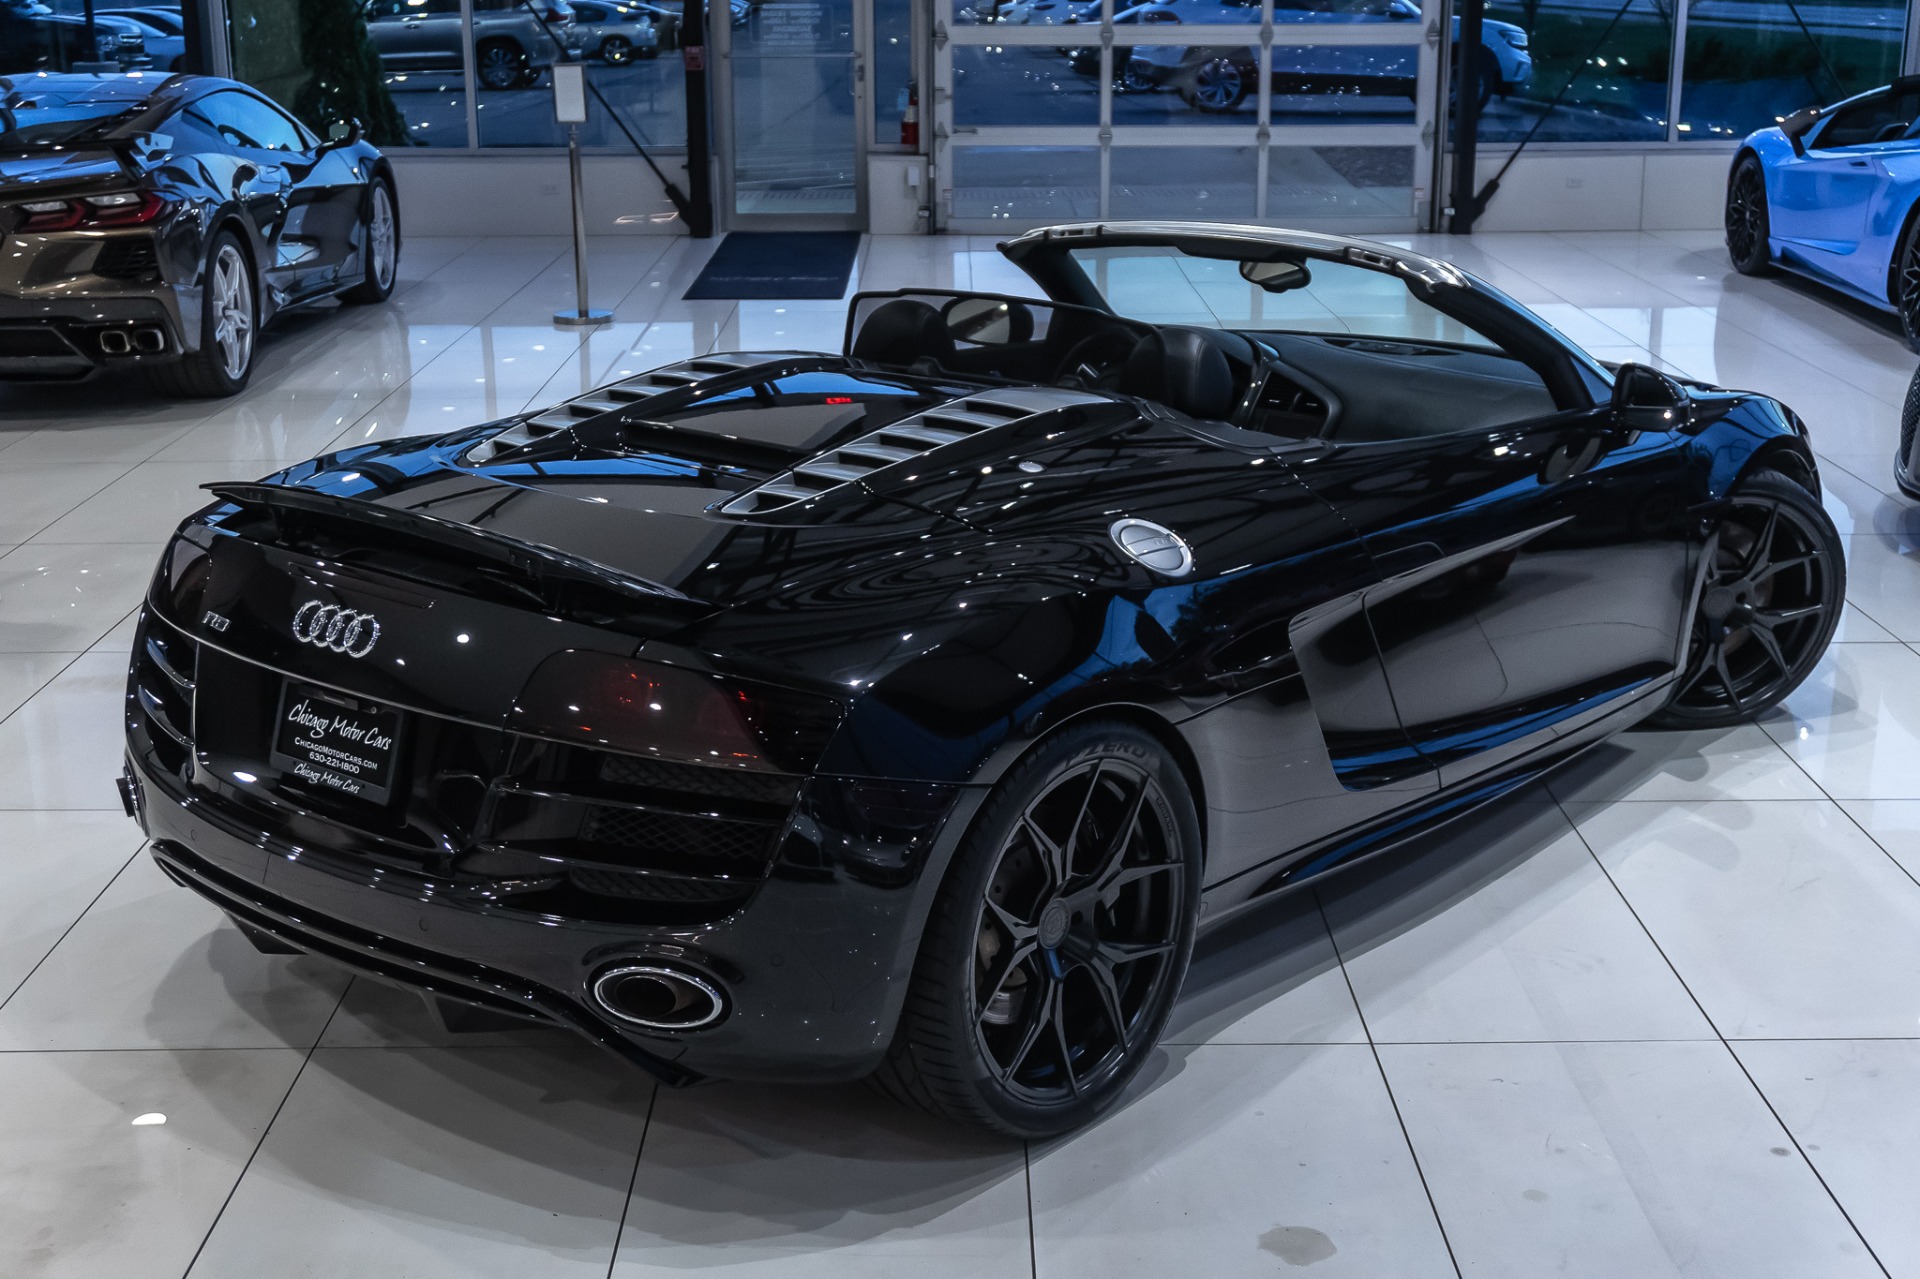 Used-2011-Audi-R8-V10-52L-SPYDER-Quattro-JUST-SERVICED-NEW-SUSPENSION-AND-TIRES-CUSTOM-EXHAUST